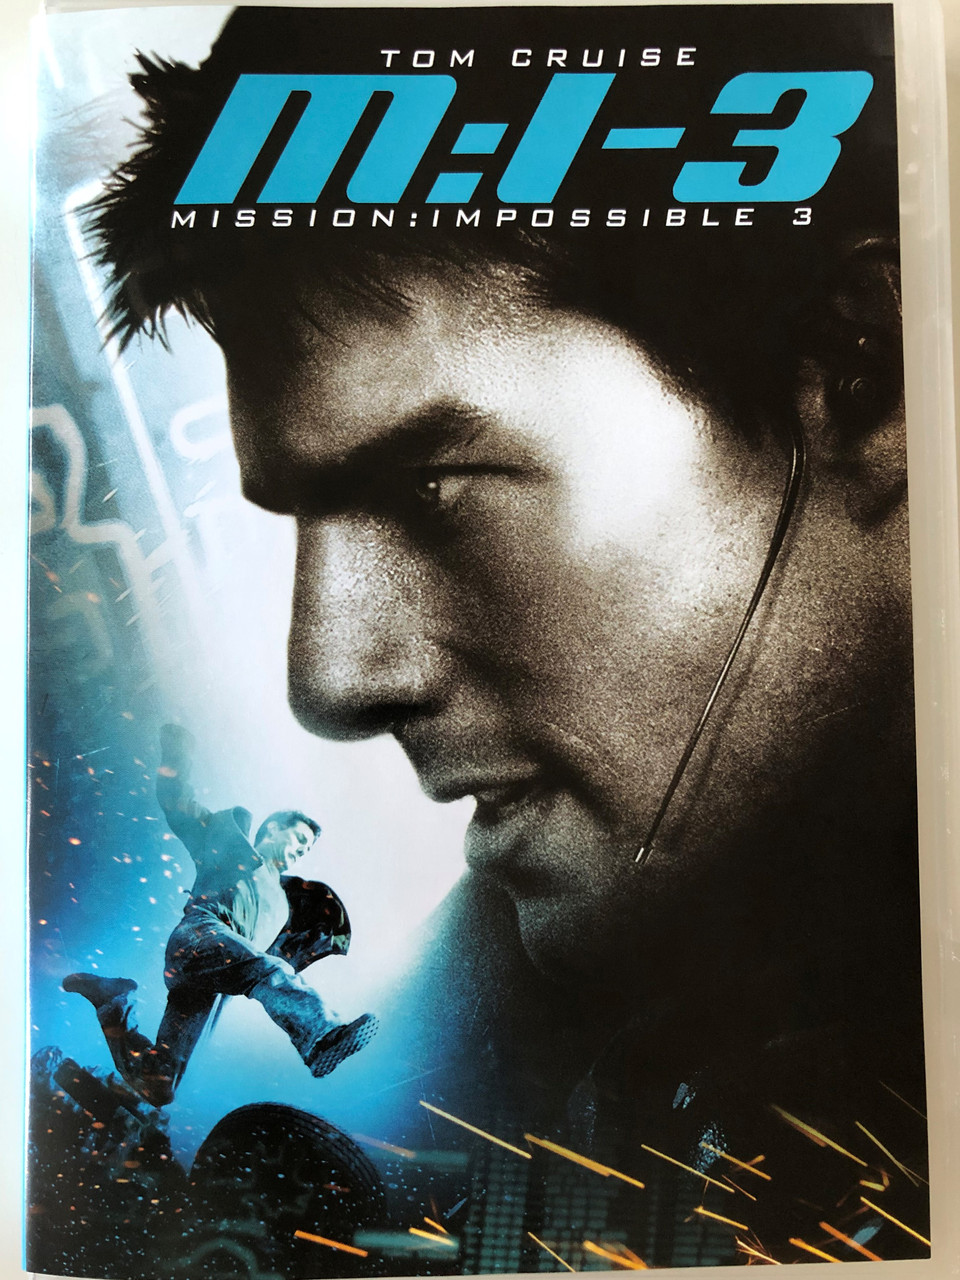 Mission Impossible 3 - M:I-3 DVD 2006 / Directed by J.J. Abrams / Starring:  Tom Cruise, Philip Seymour Hoffman , Ving Rhames, Billy Crudup - Bible in  My Language